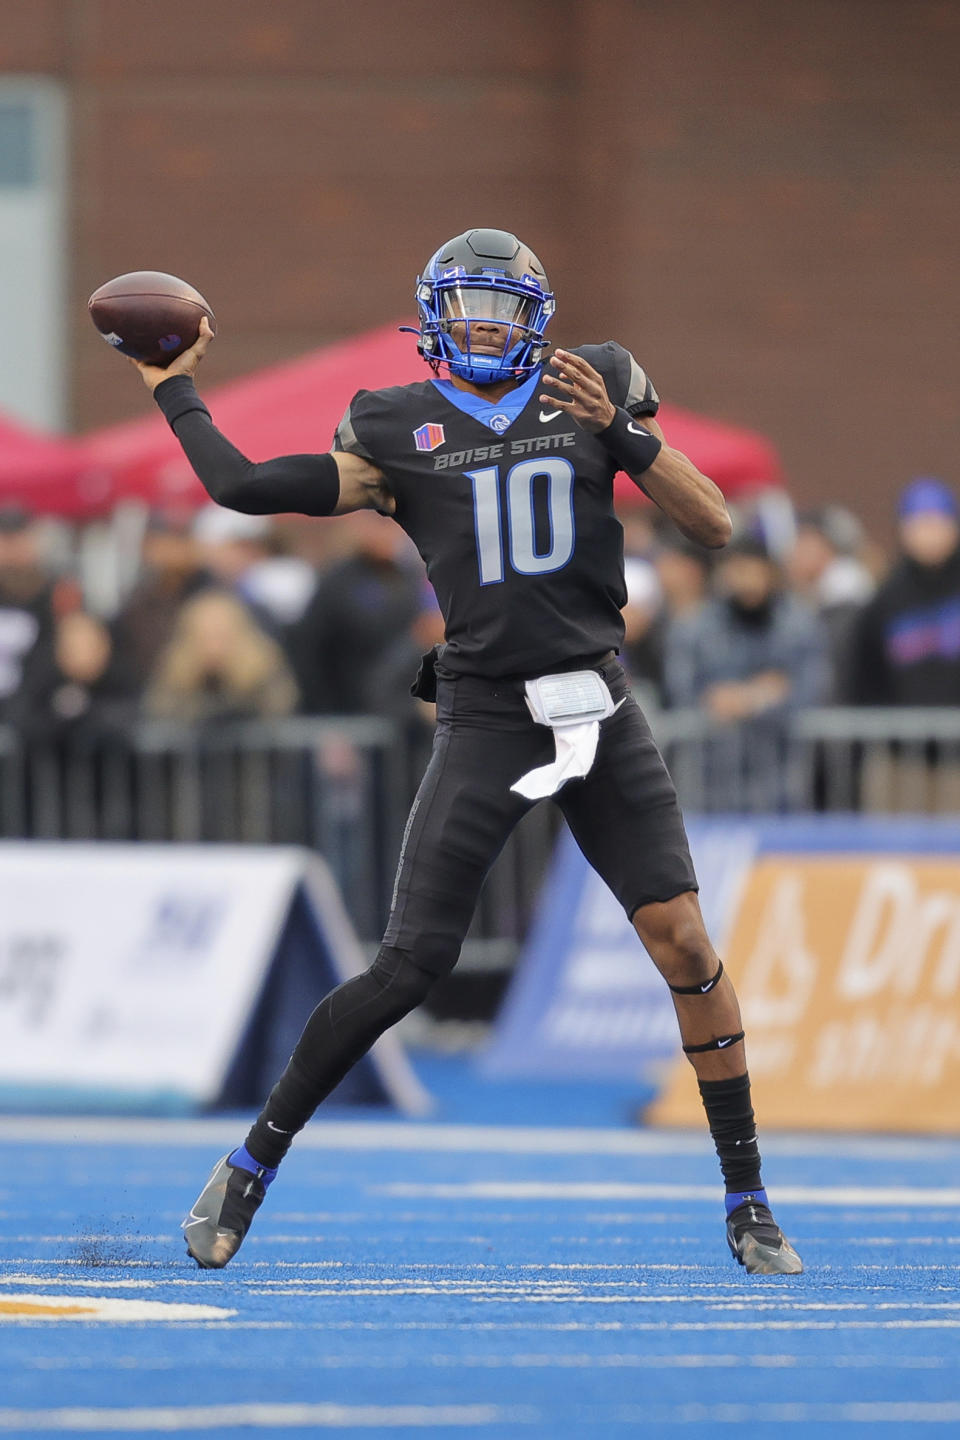 Boise State quarterback Taylen Green looks to throw against BYU in the first half of an NCAA college football game, Saturday, Nov. 5, 2022, in Boise, Idaho. (AP Photo/Steve Conner)